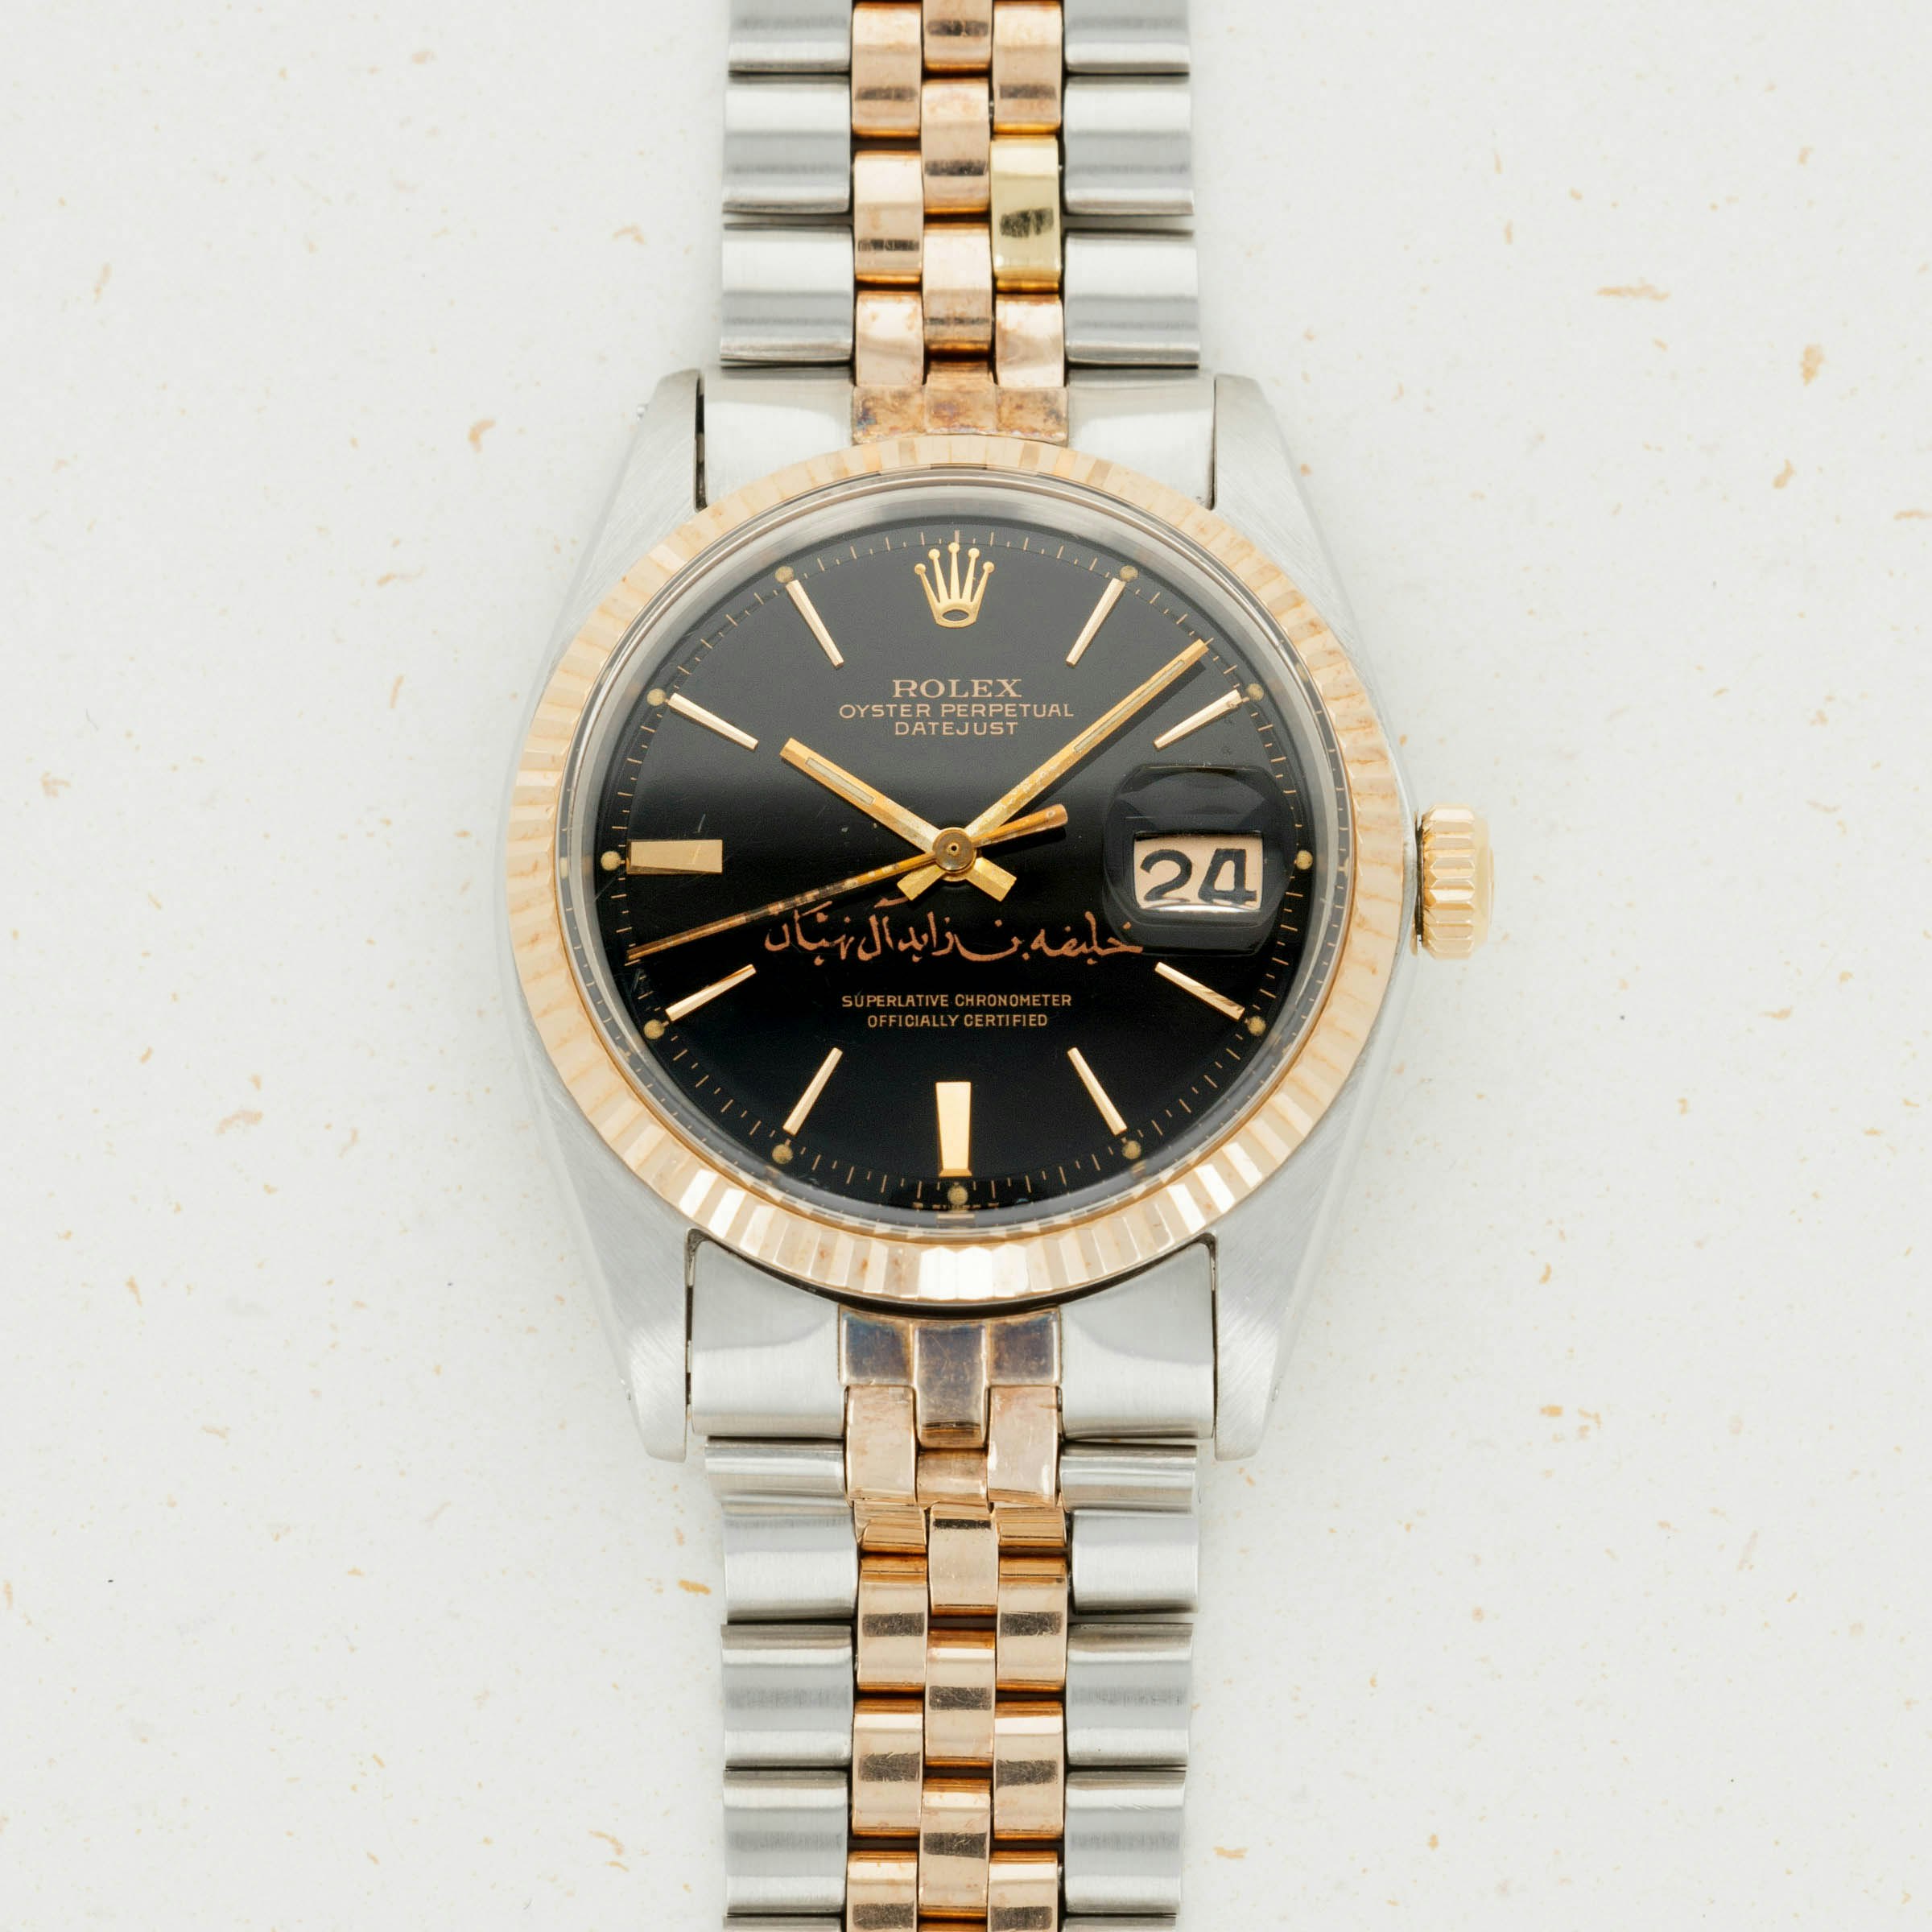 Thumbnail for Rolex 1601 Two Tone Rose Datejust for Khalifa bin Zayed Al Nahyan